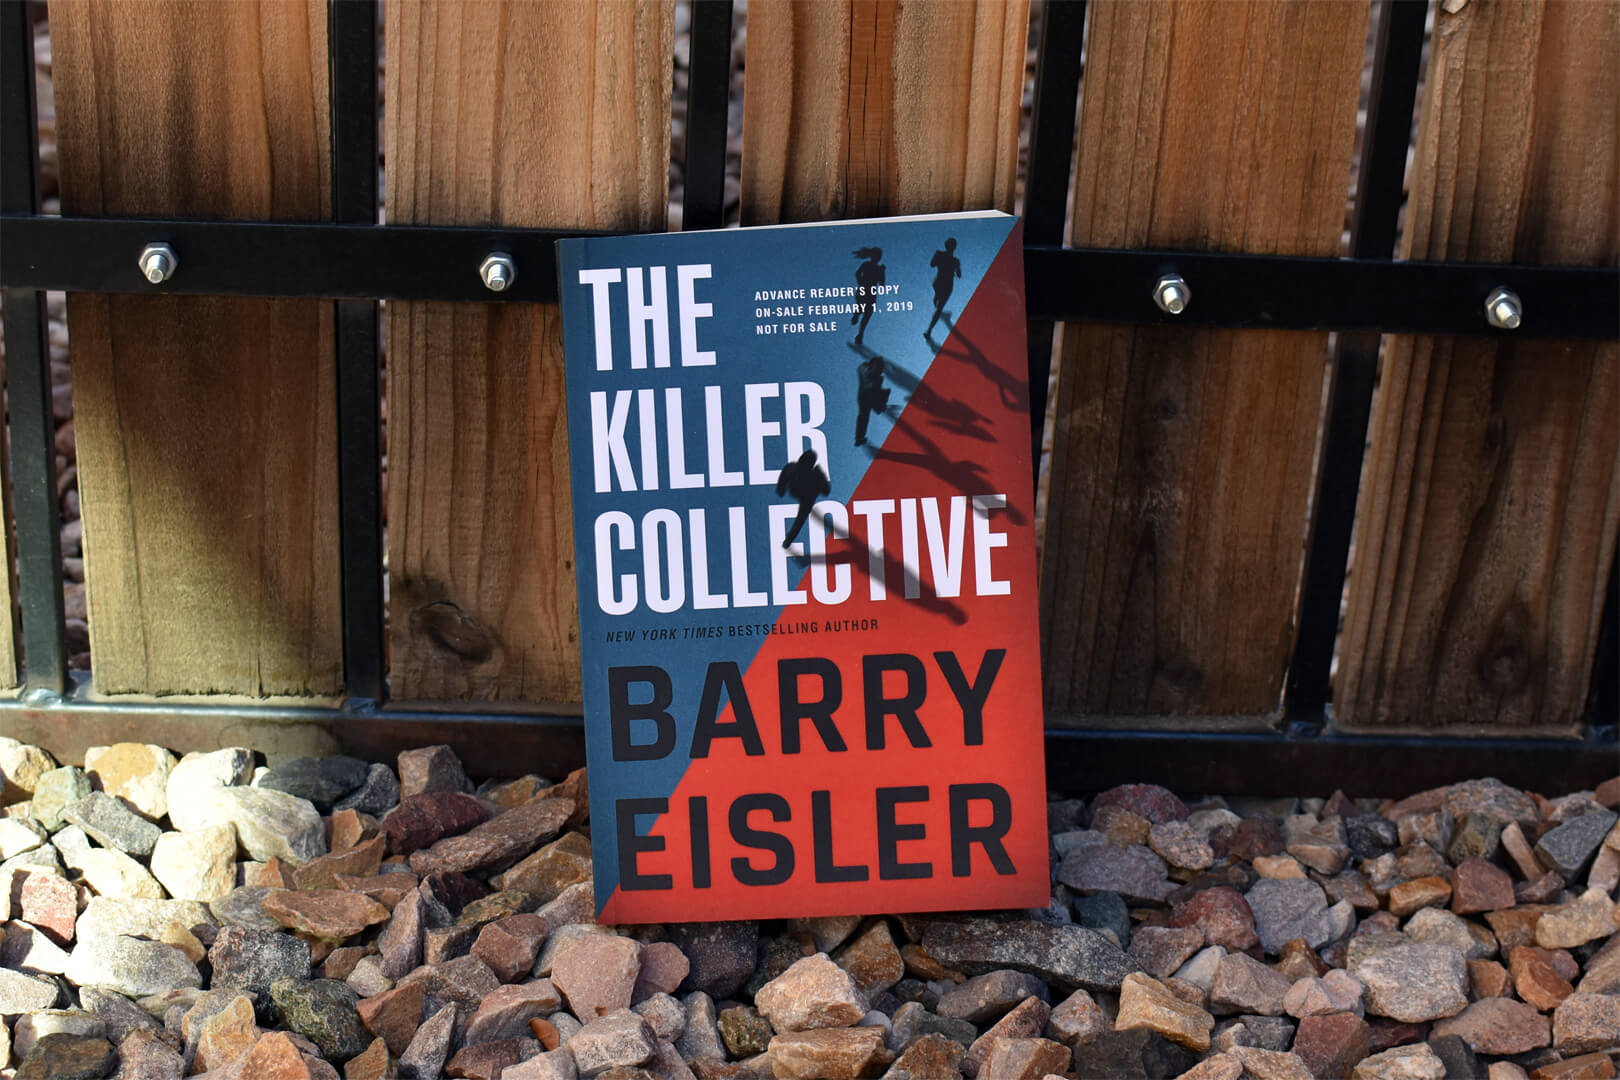 Review: Barry Eisler’s The Killer Collective